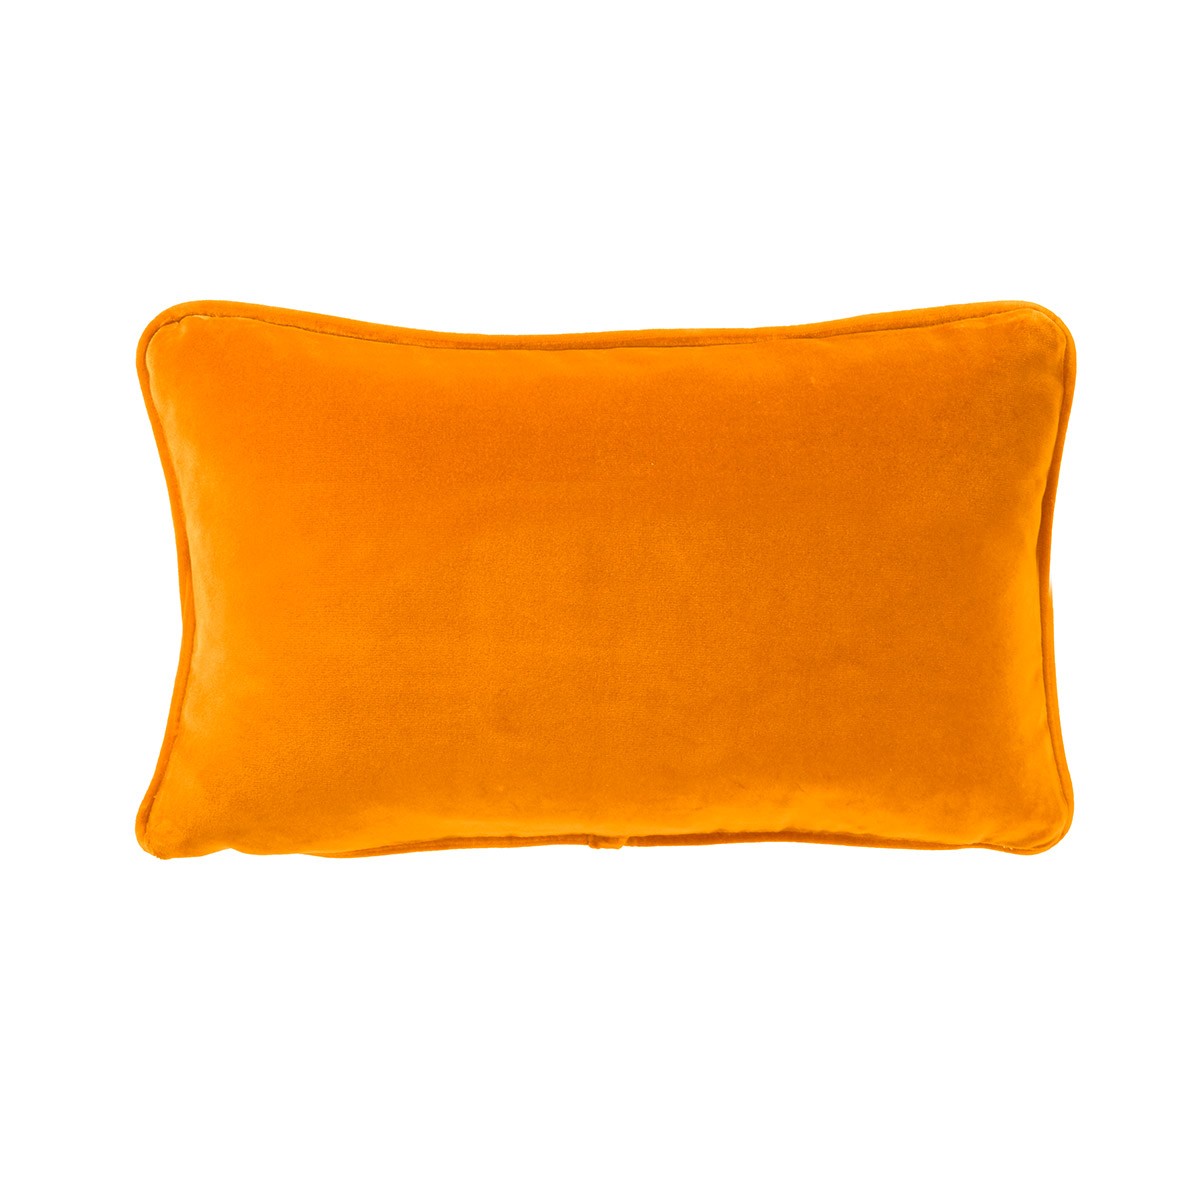 Featured image for “Coussin Divan”